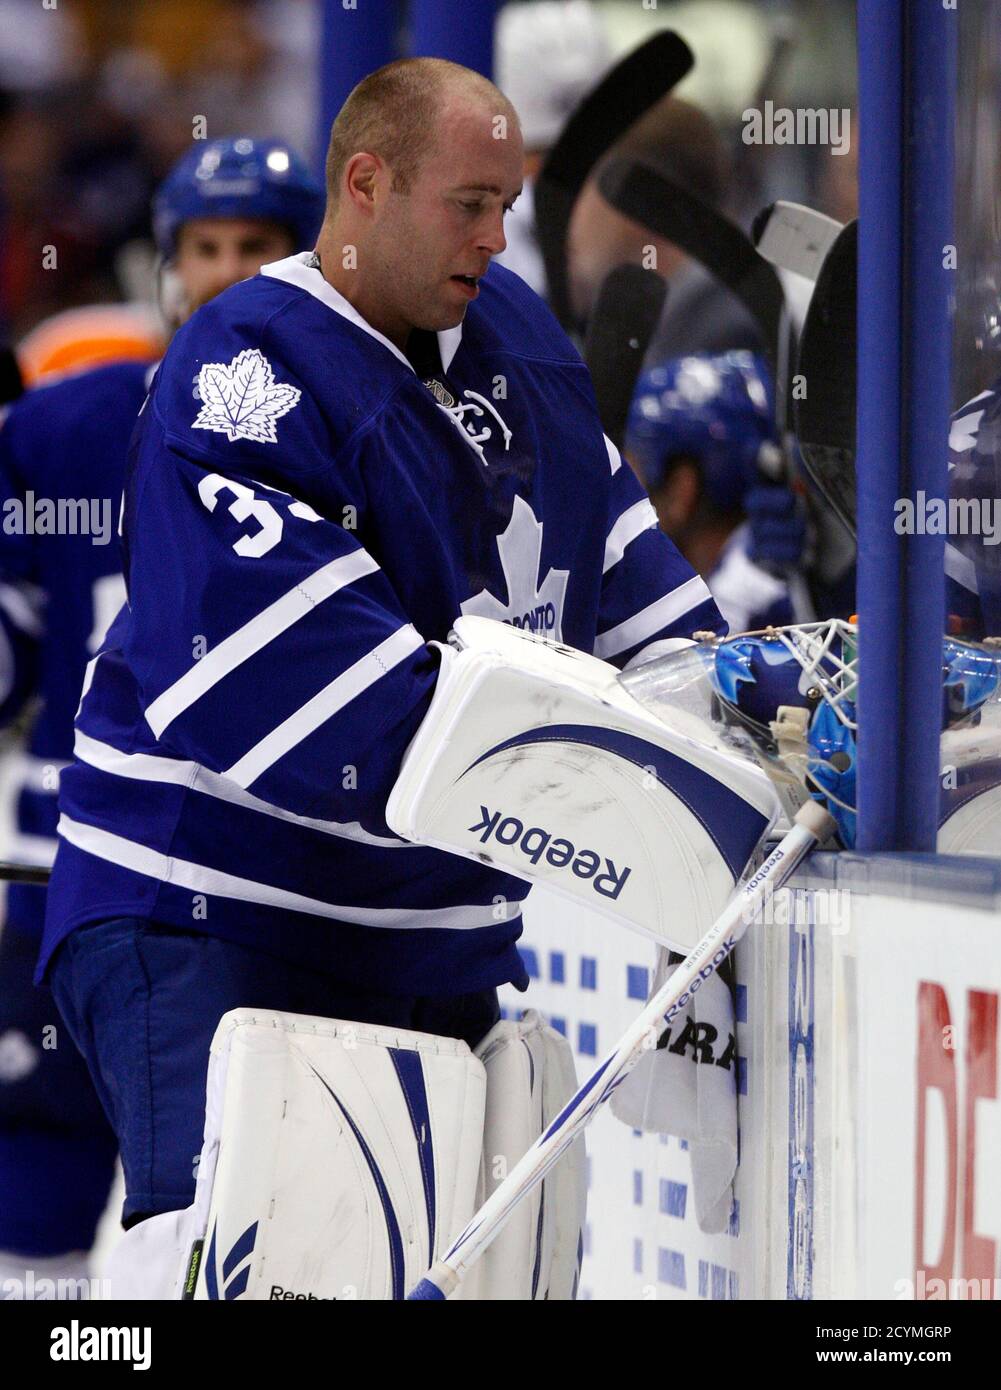 Toronto Maple Leafs goalie J.S. Giguere stands by the bench during a break  in the third period of their NHL pre-season hockey game against the  Philadelphia Flyers in Toronto September 24, 2010.